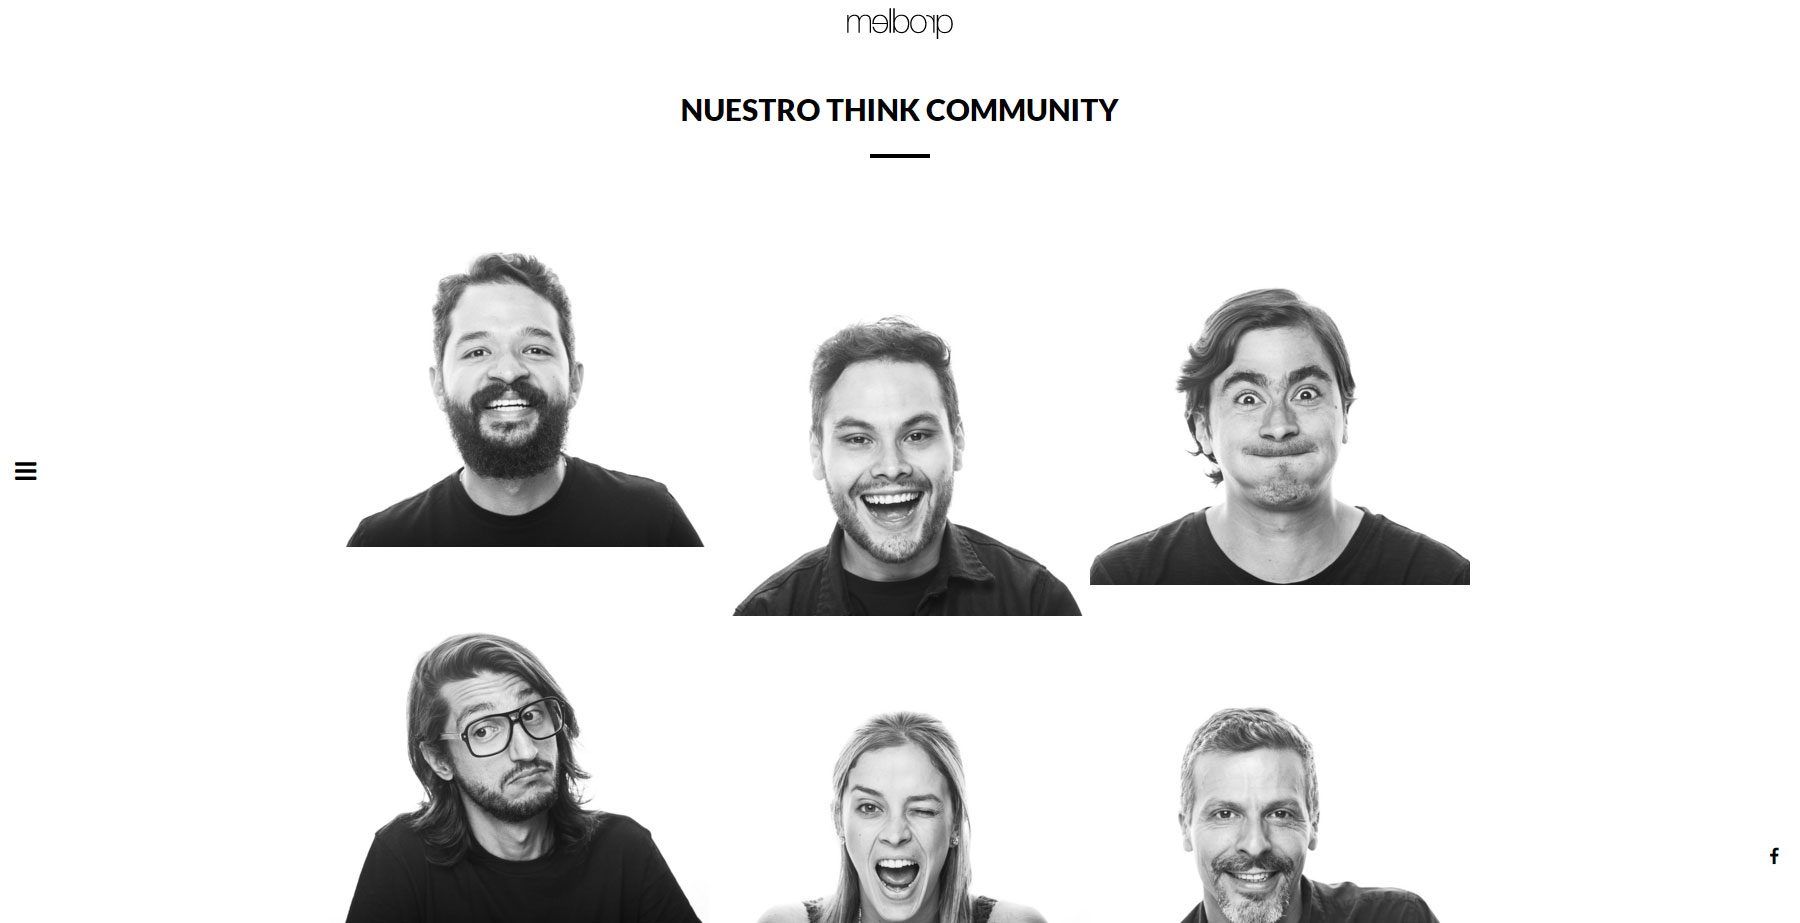 Melborp - Think Community - Website of the Day